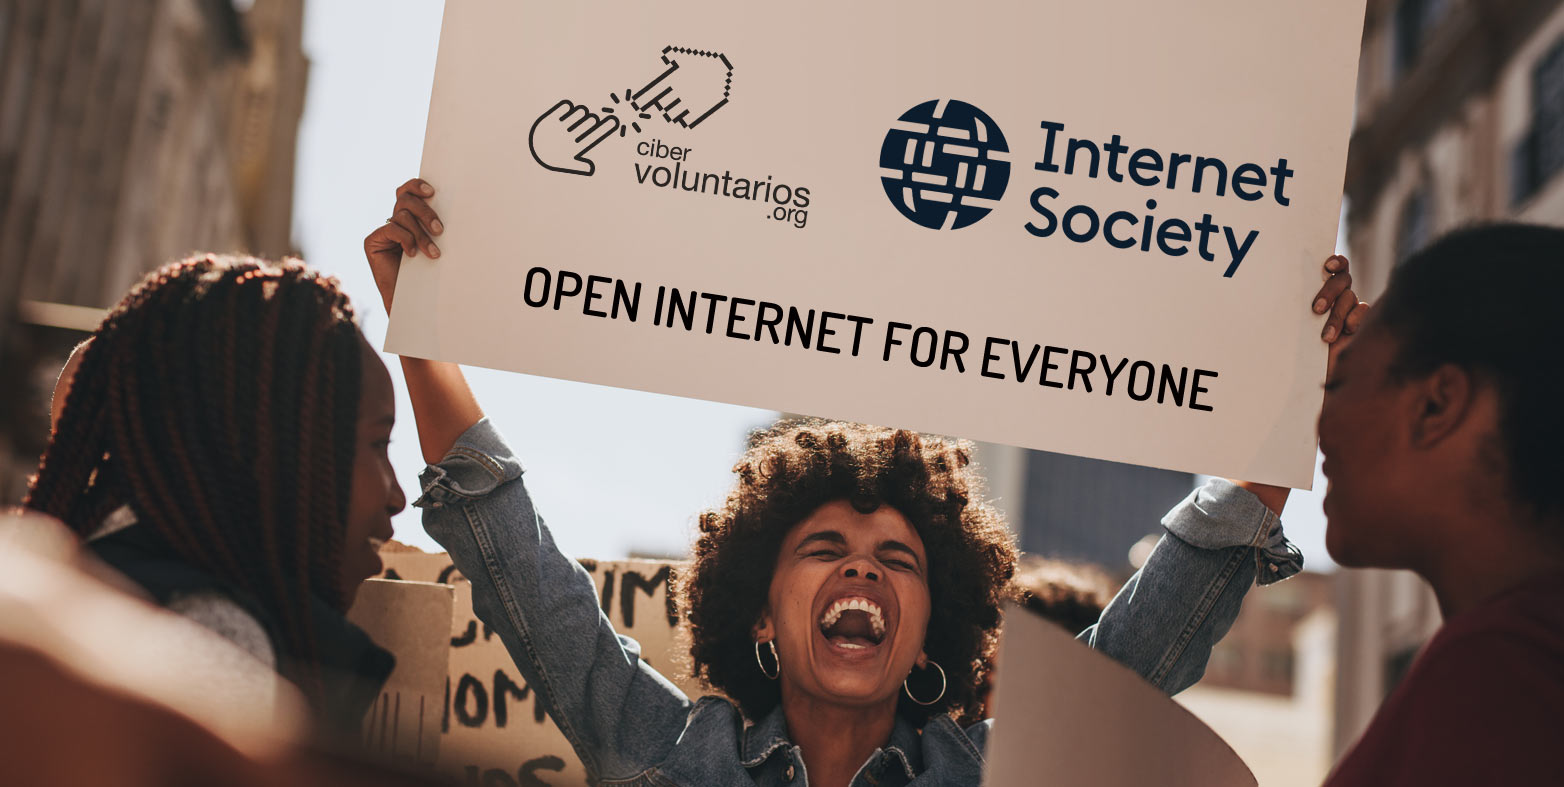 Cibervoluntarios Foundation joins the Internet Society: Working for an open Internet for all people